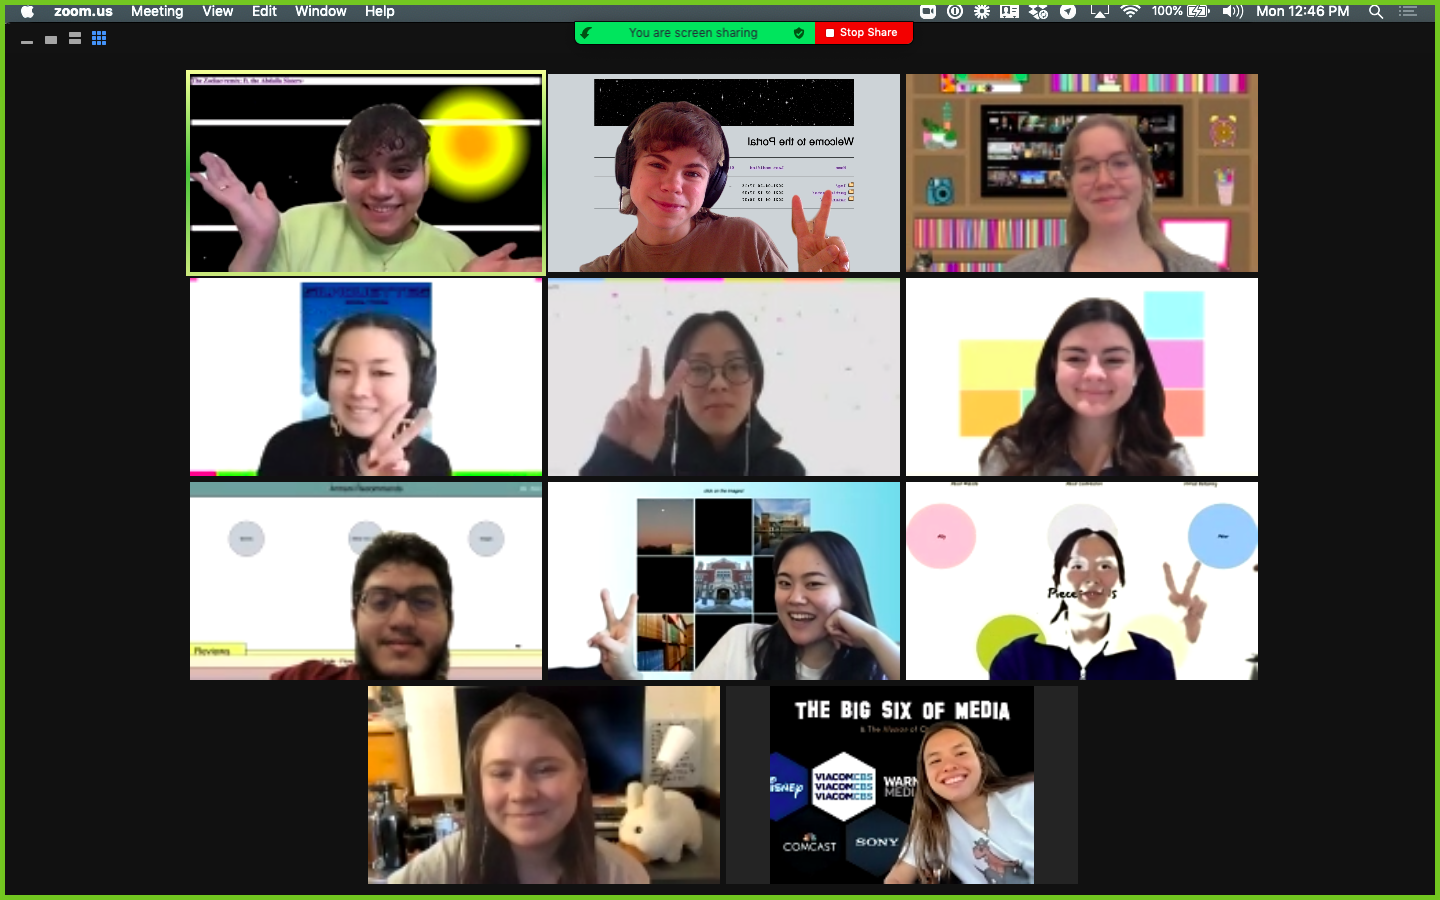 Another screenshot of us on Zoom, this time our backgrounds are the sites we created for our series projects. Everyone is smiling, some people give peace signs with their hands